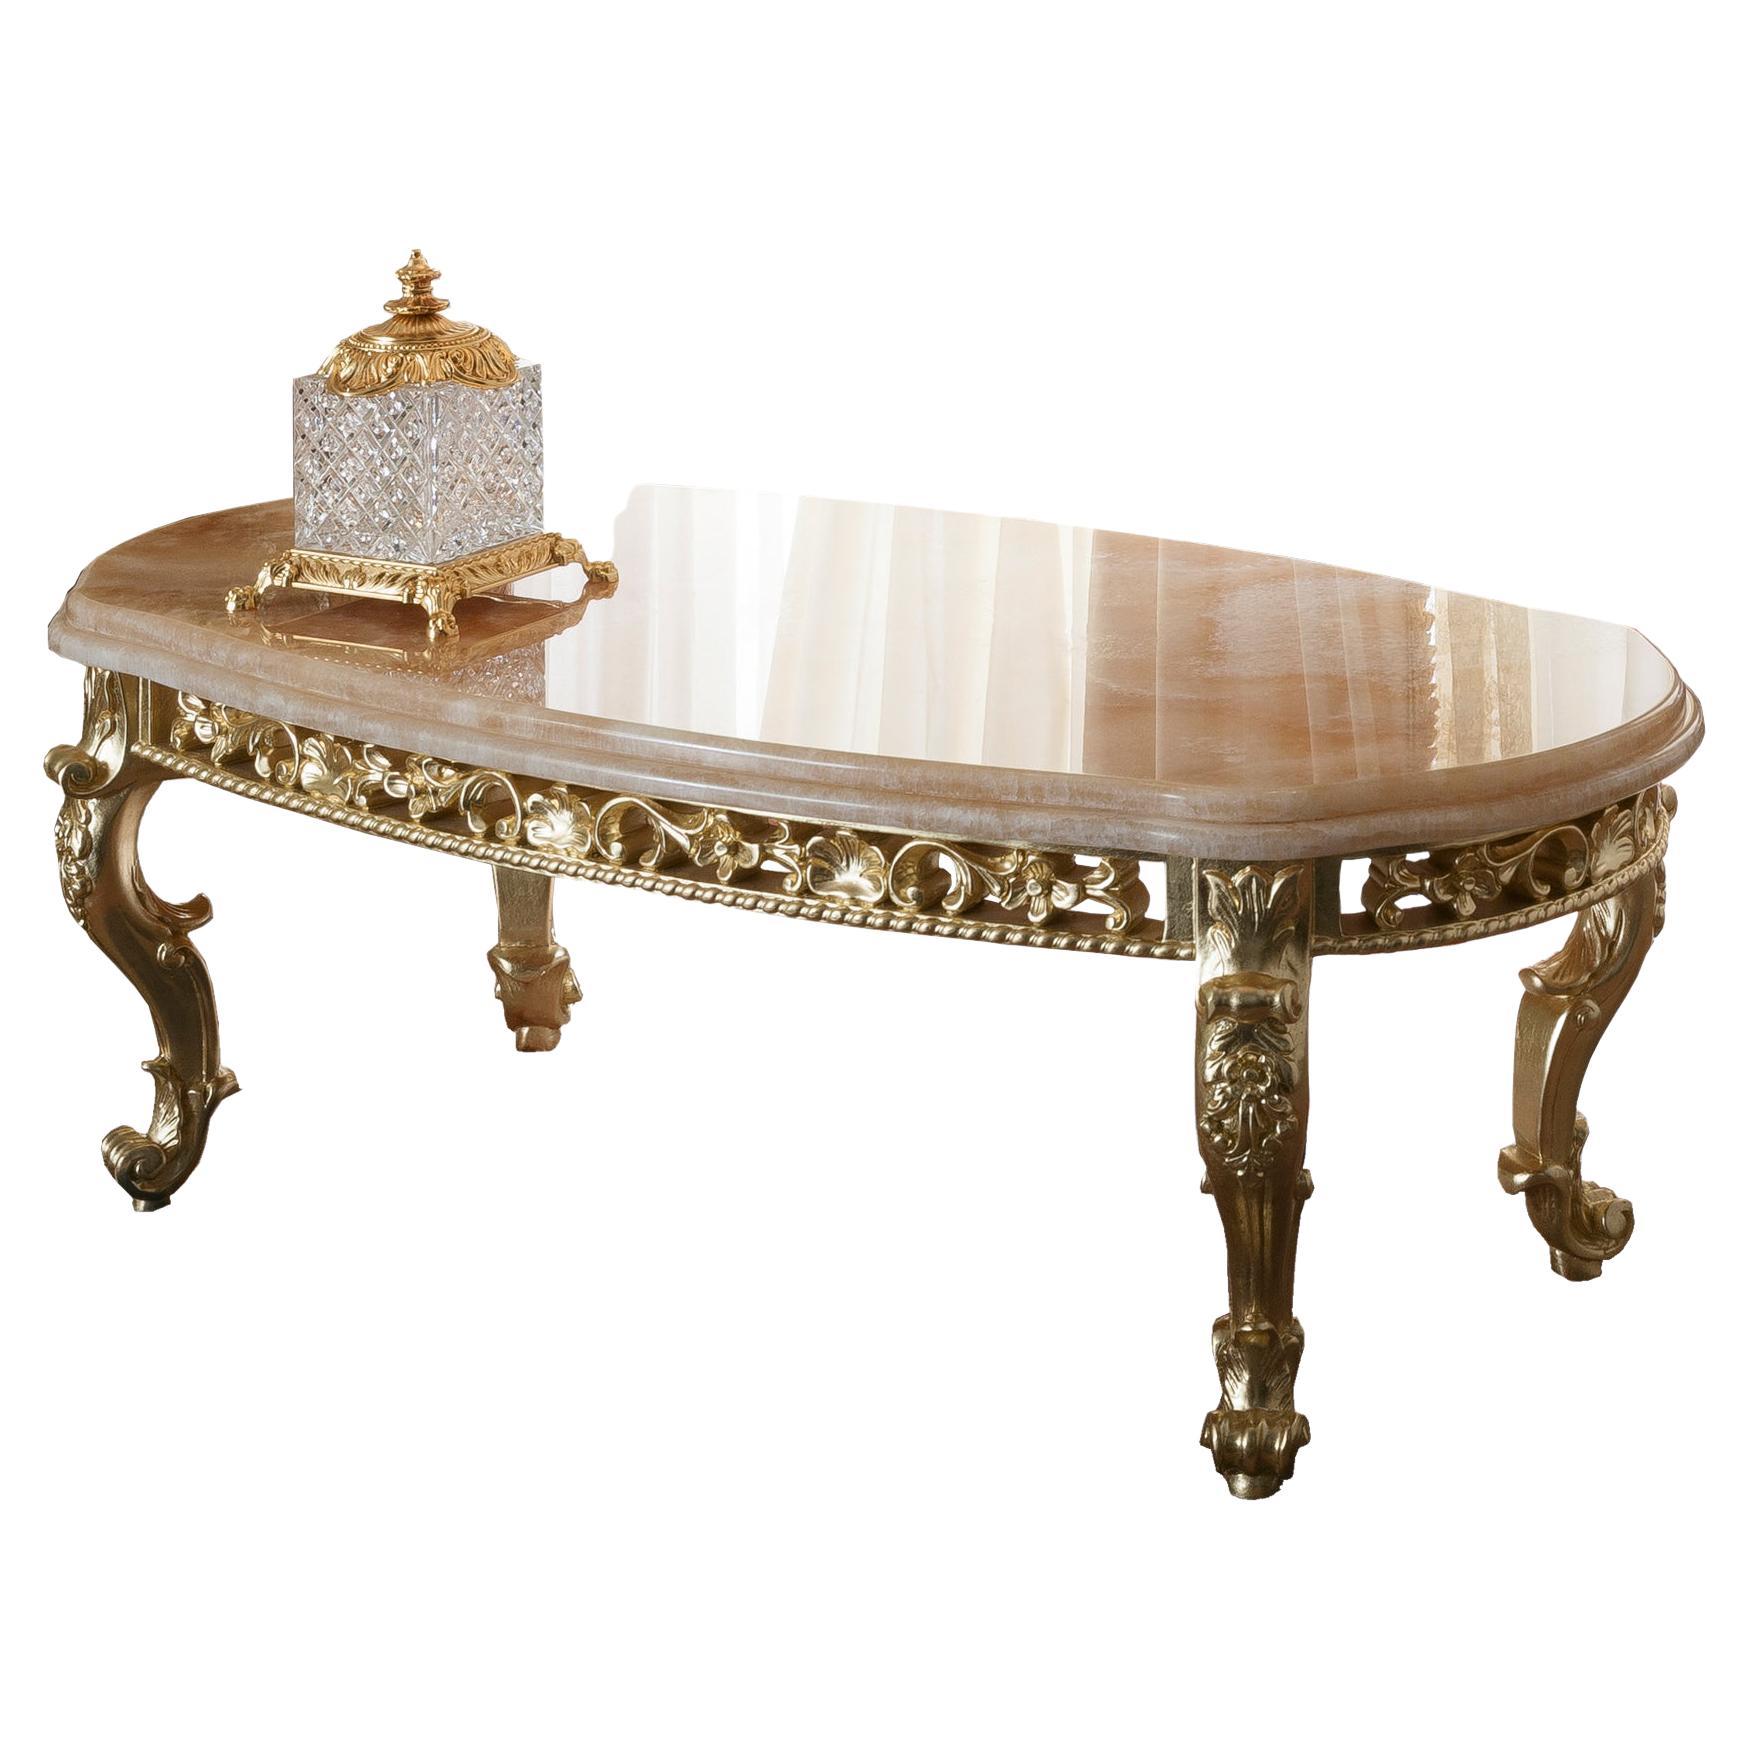 Polished Honey Onyx Baroque Oval Coffee Table by Modenese For Sale